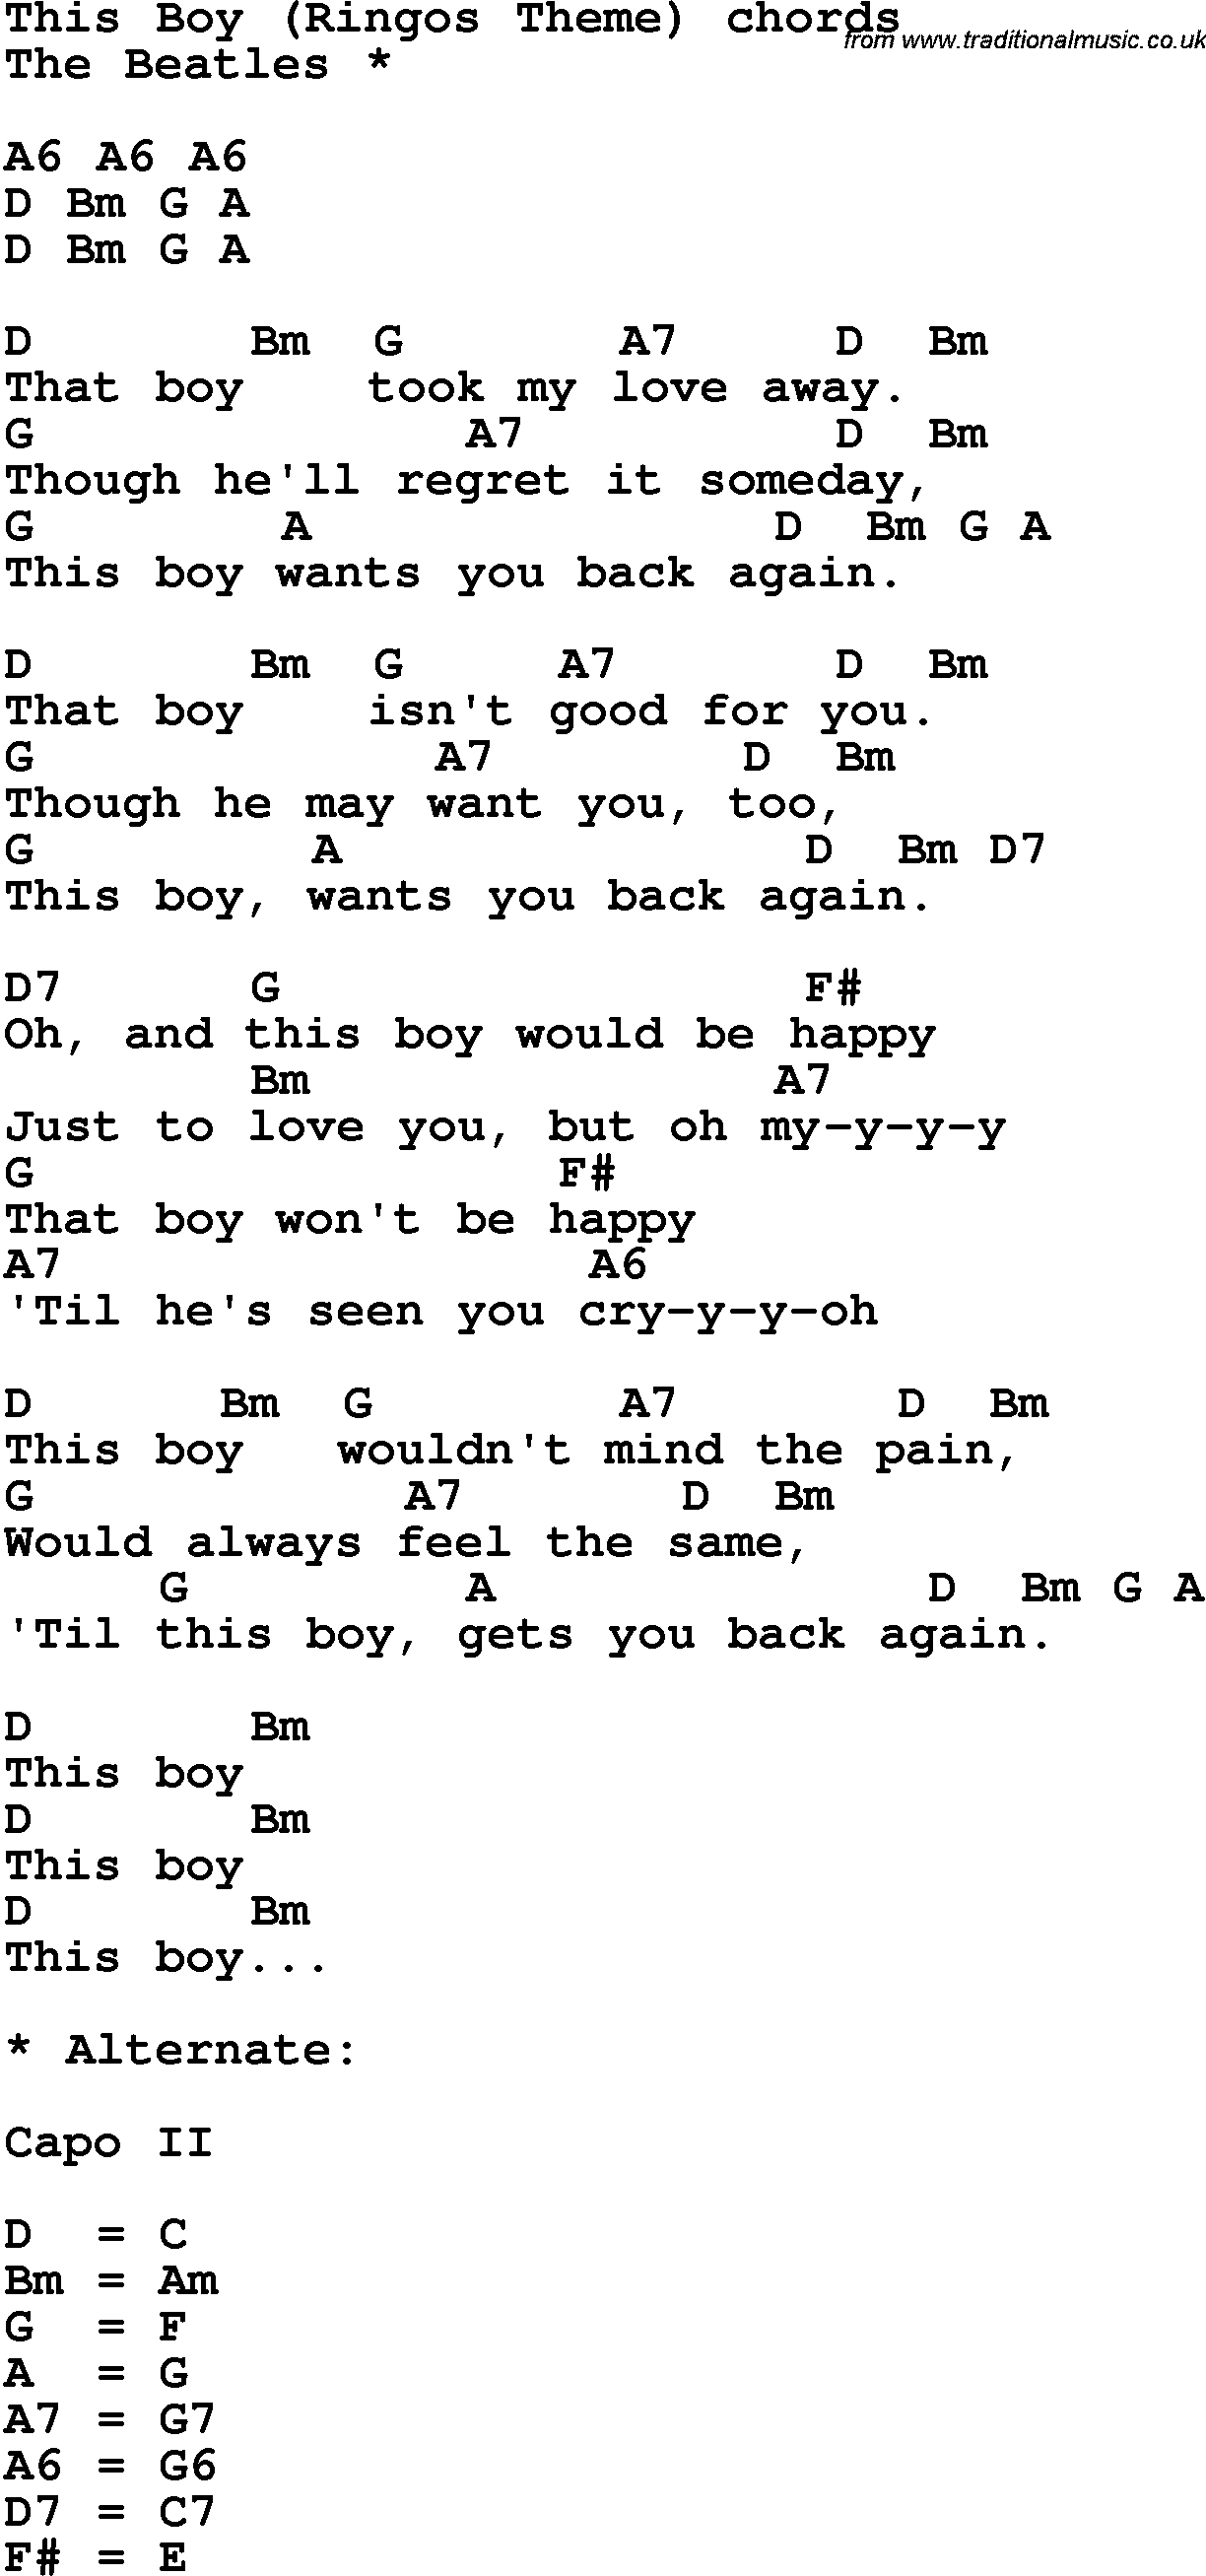 Song Lyrics with guitar chords for This Boy - The Beatles